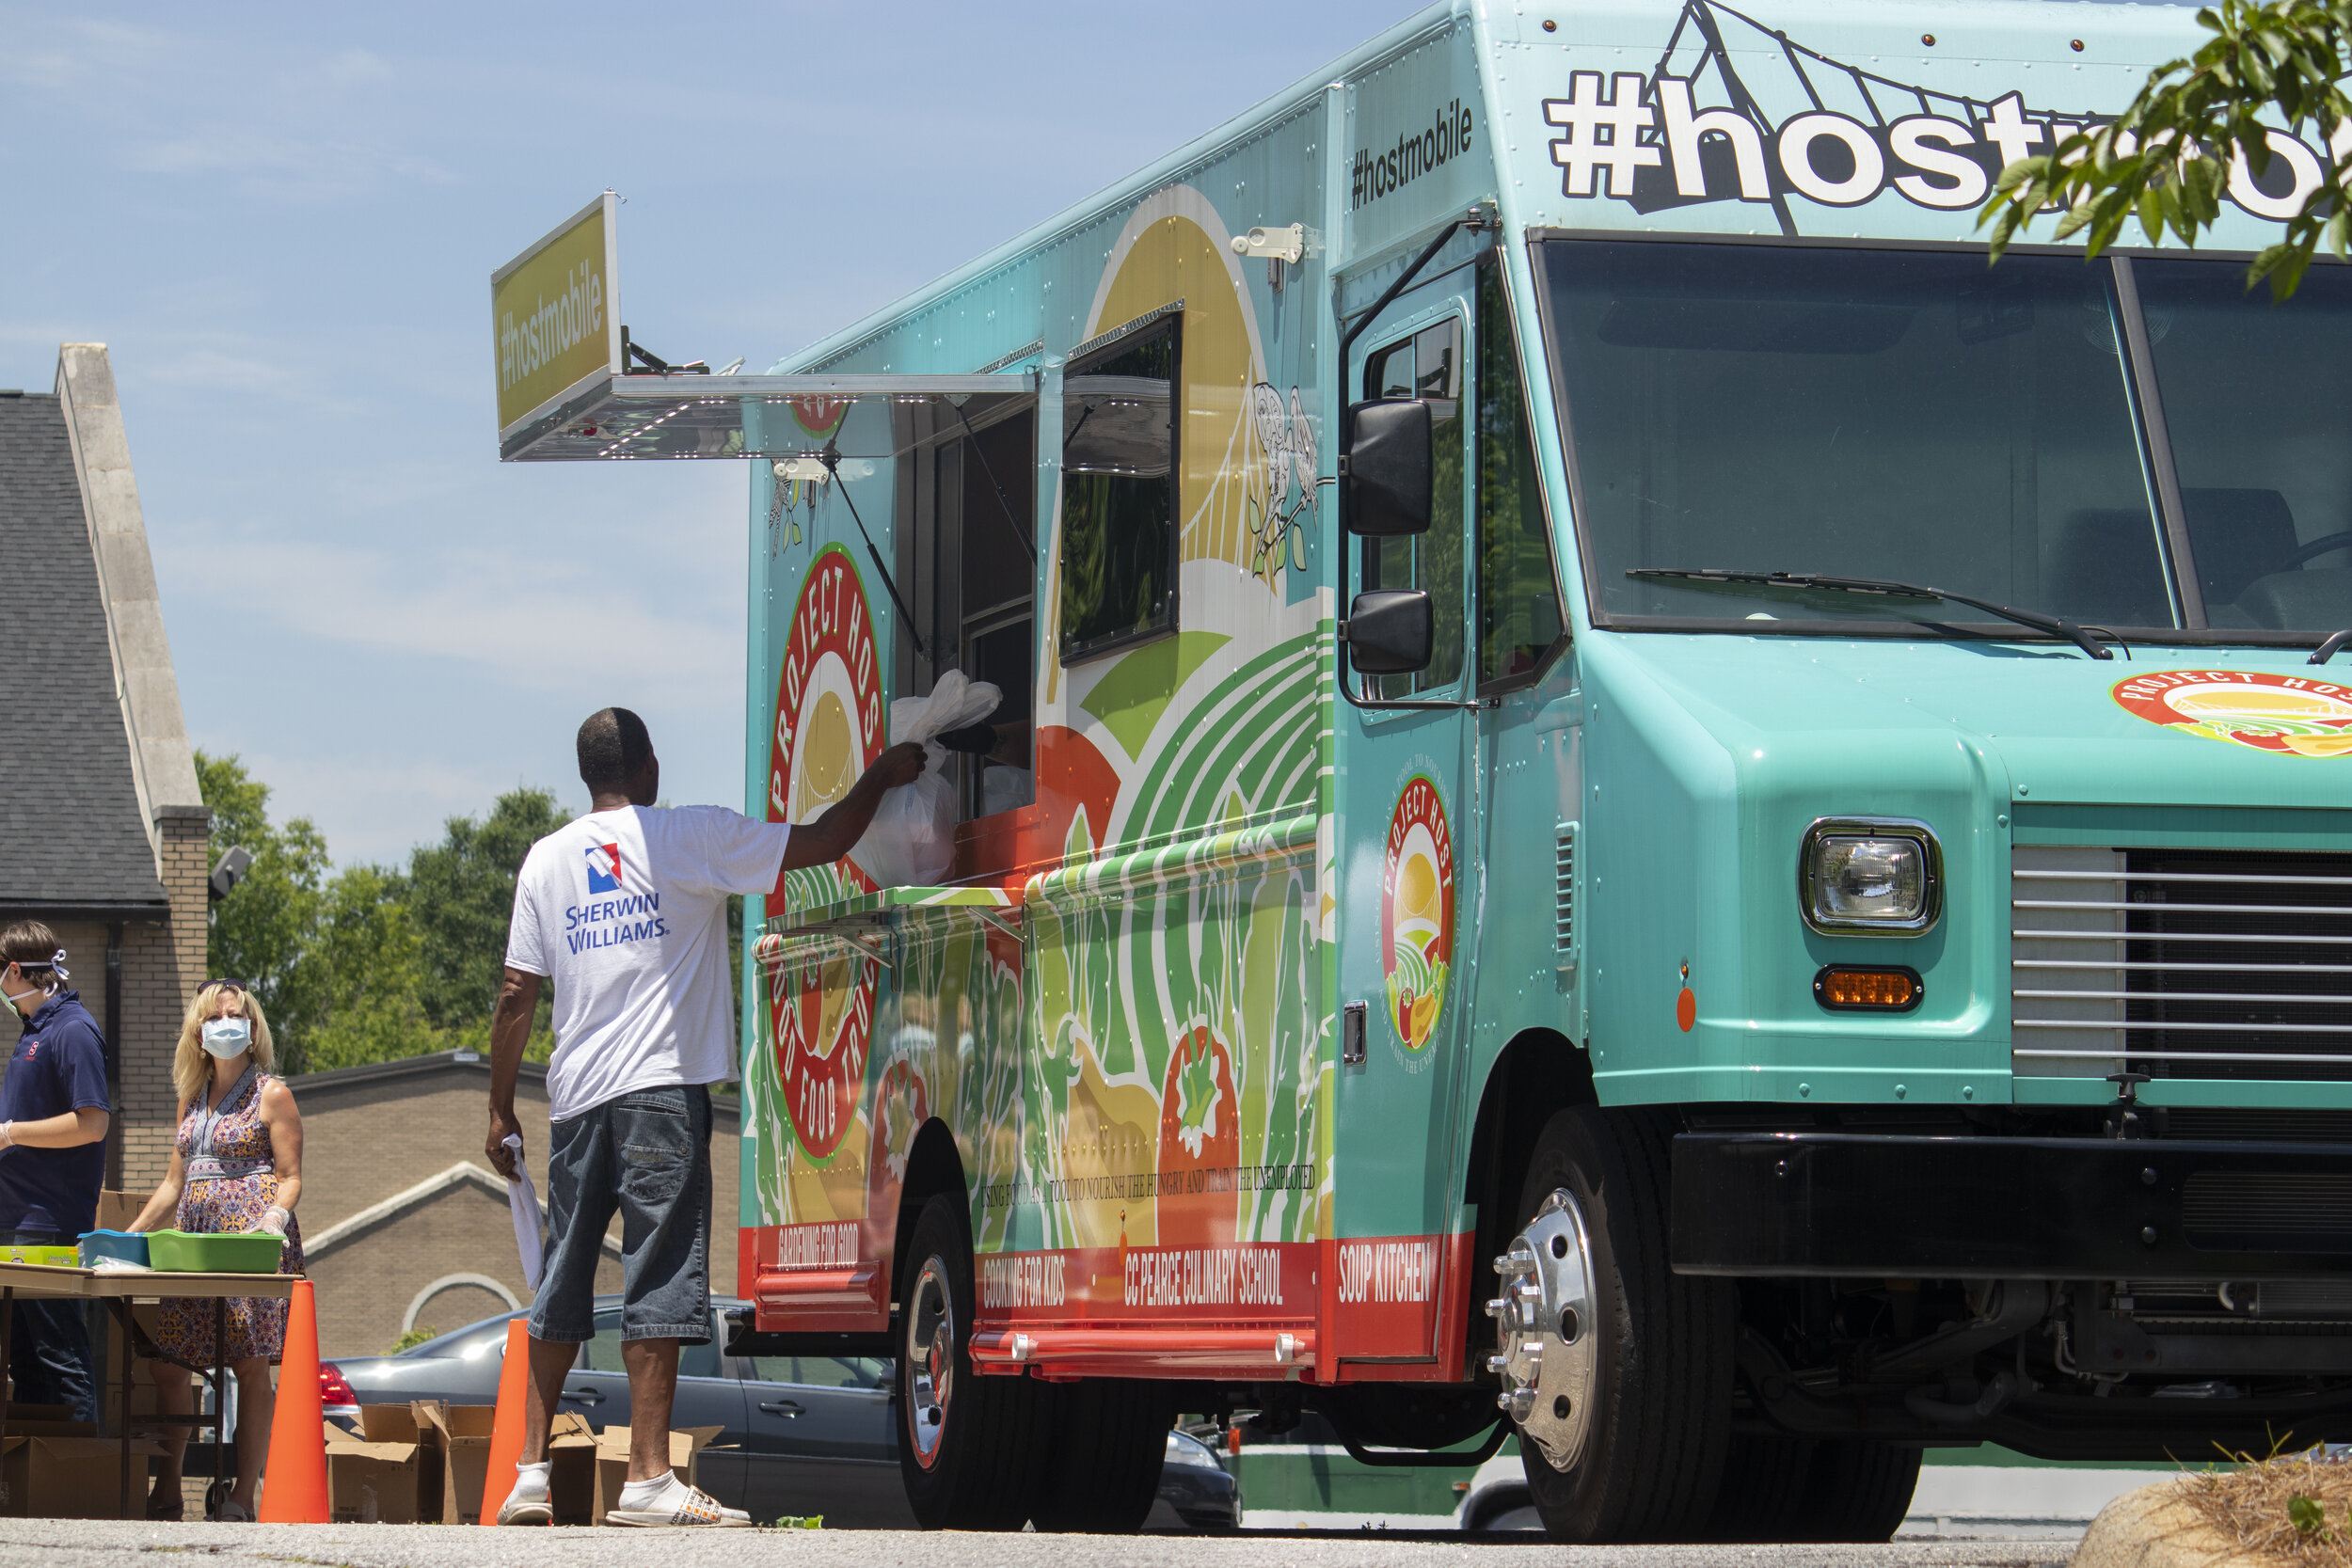  Free service of the HostMobile, which was given to Project Host through a Fluor Golf for Greenville grant. 